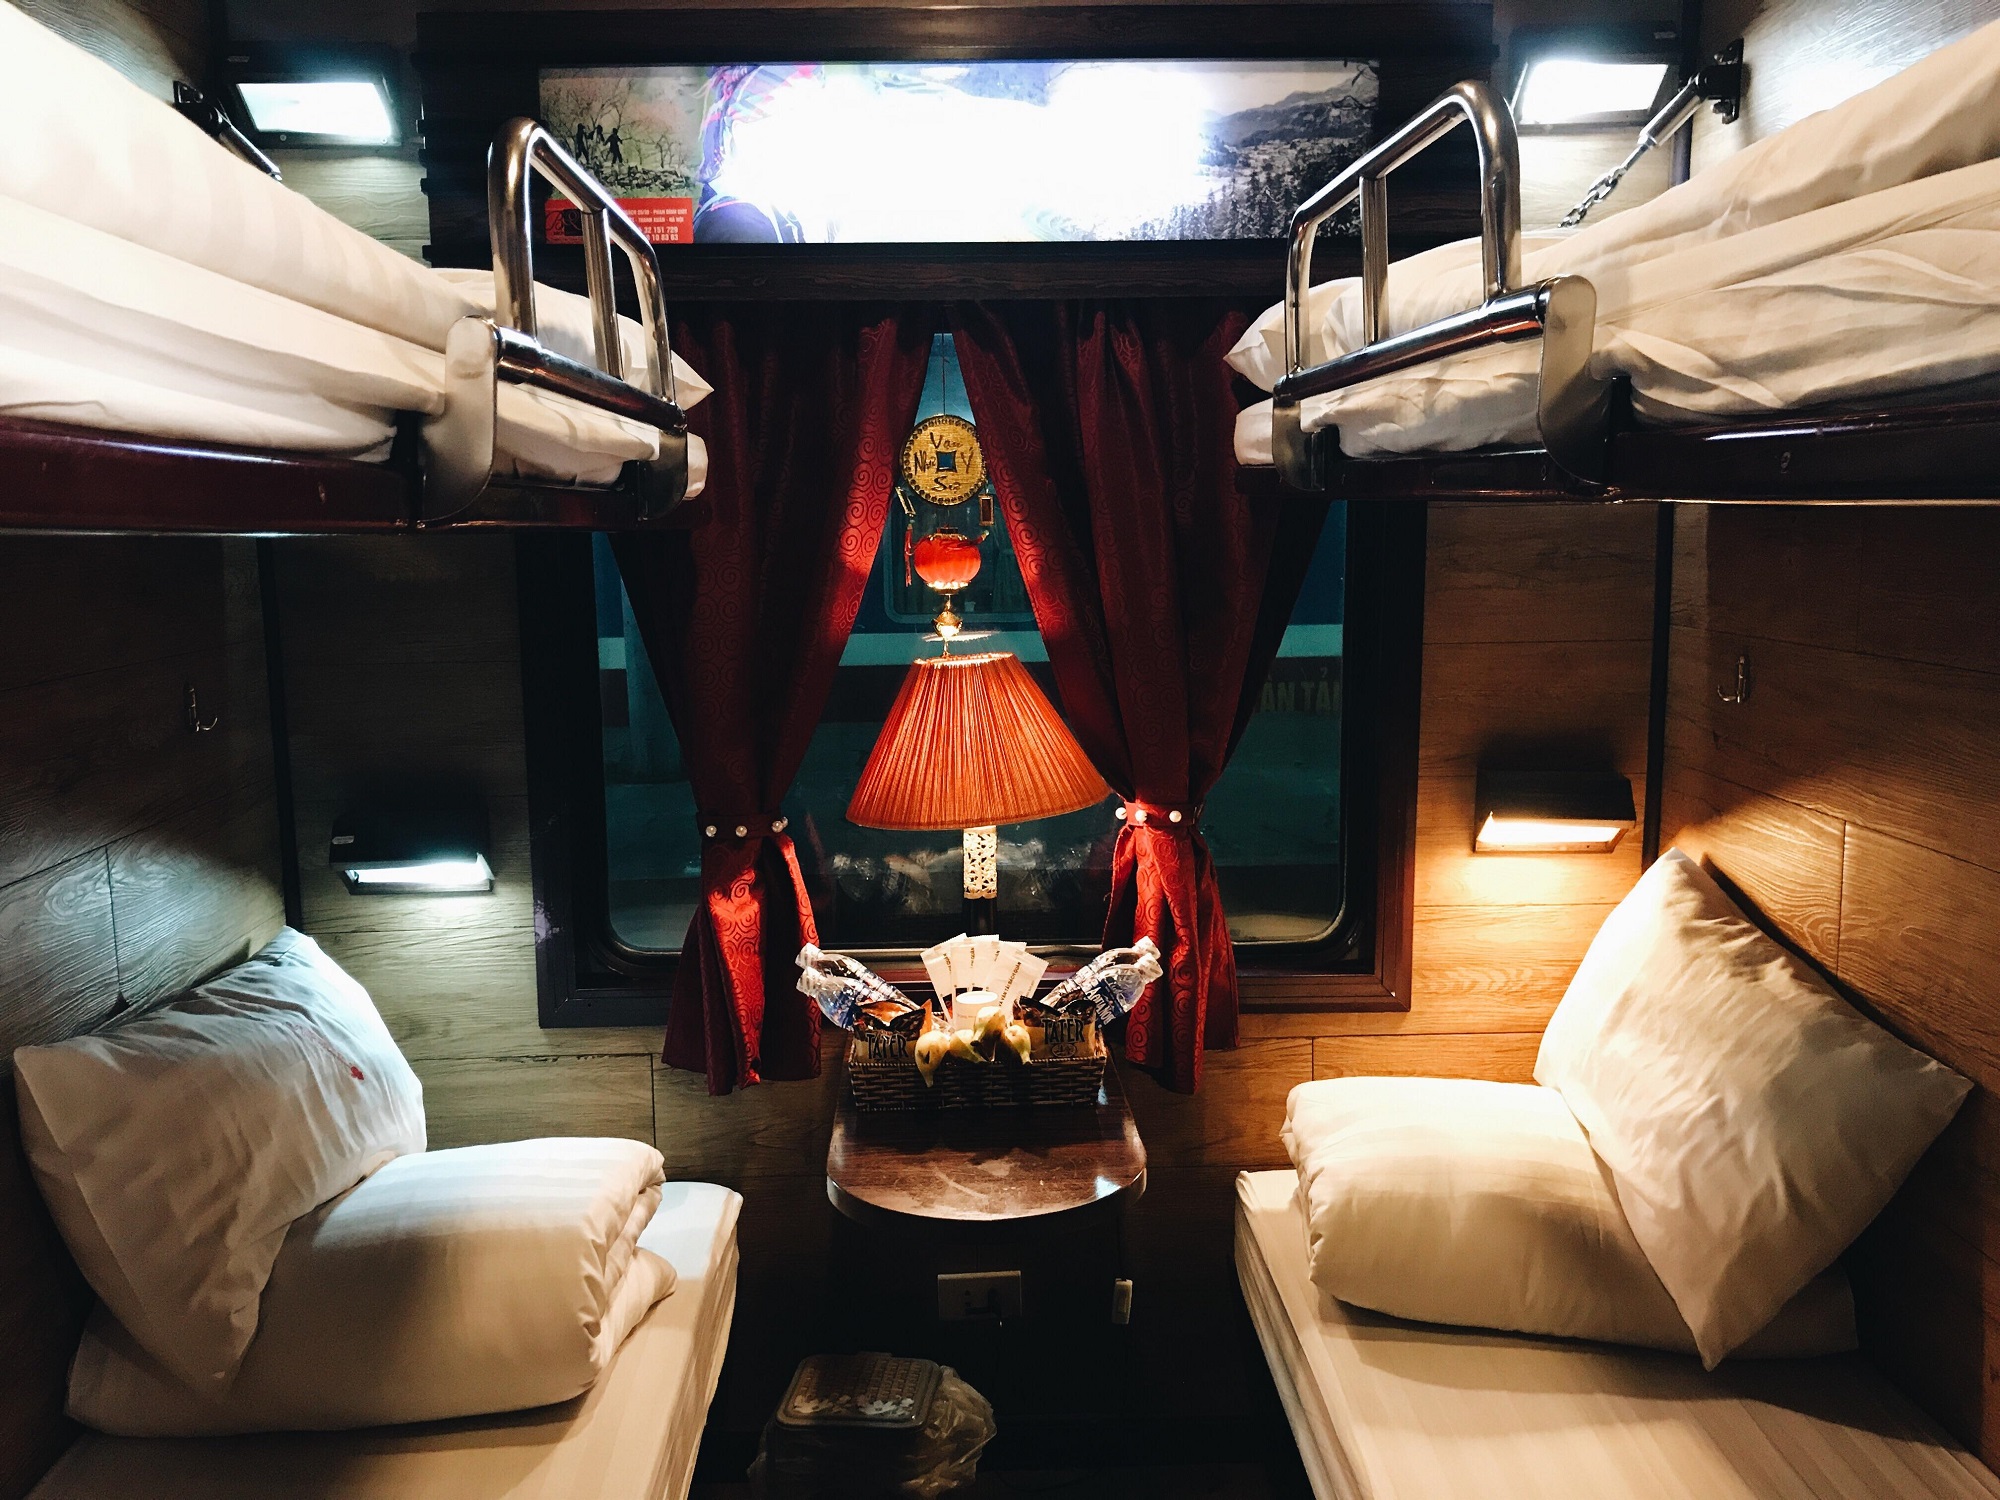 4 Berth sleeper cabin on train from Ho Chi Minh to Halong Bay